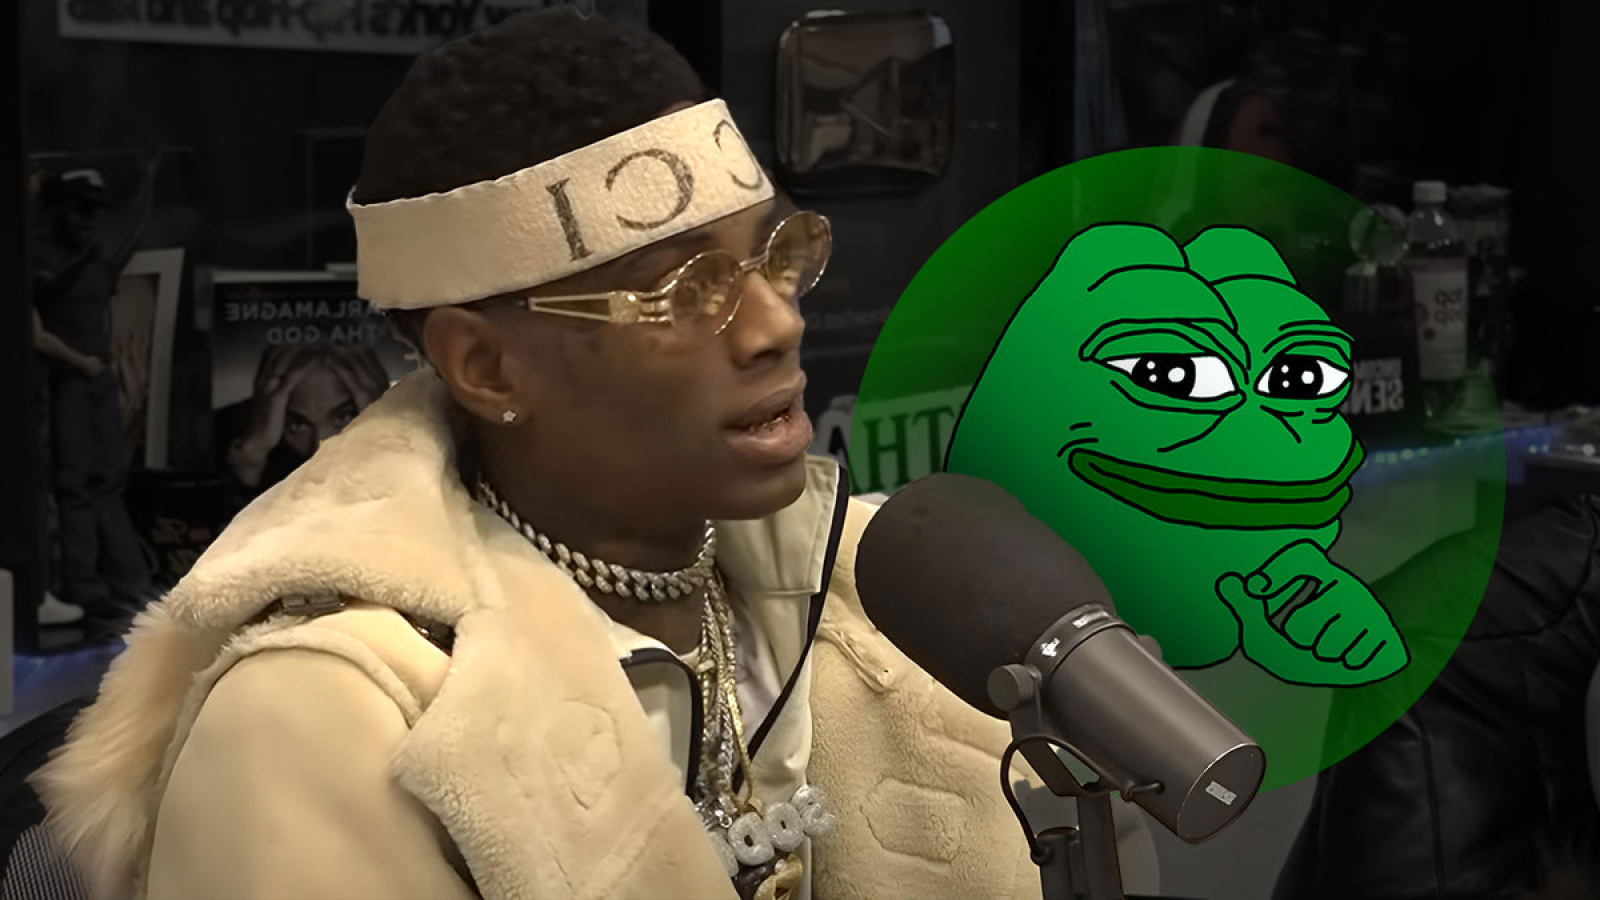 Soulja Boy says he's done with rapping, is 'an actor now